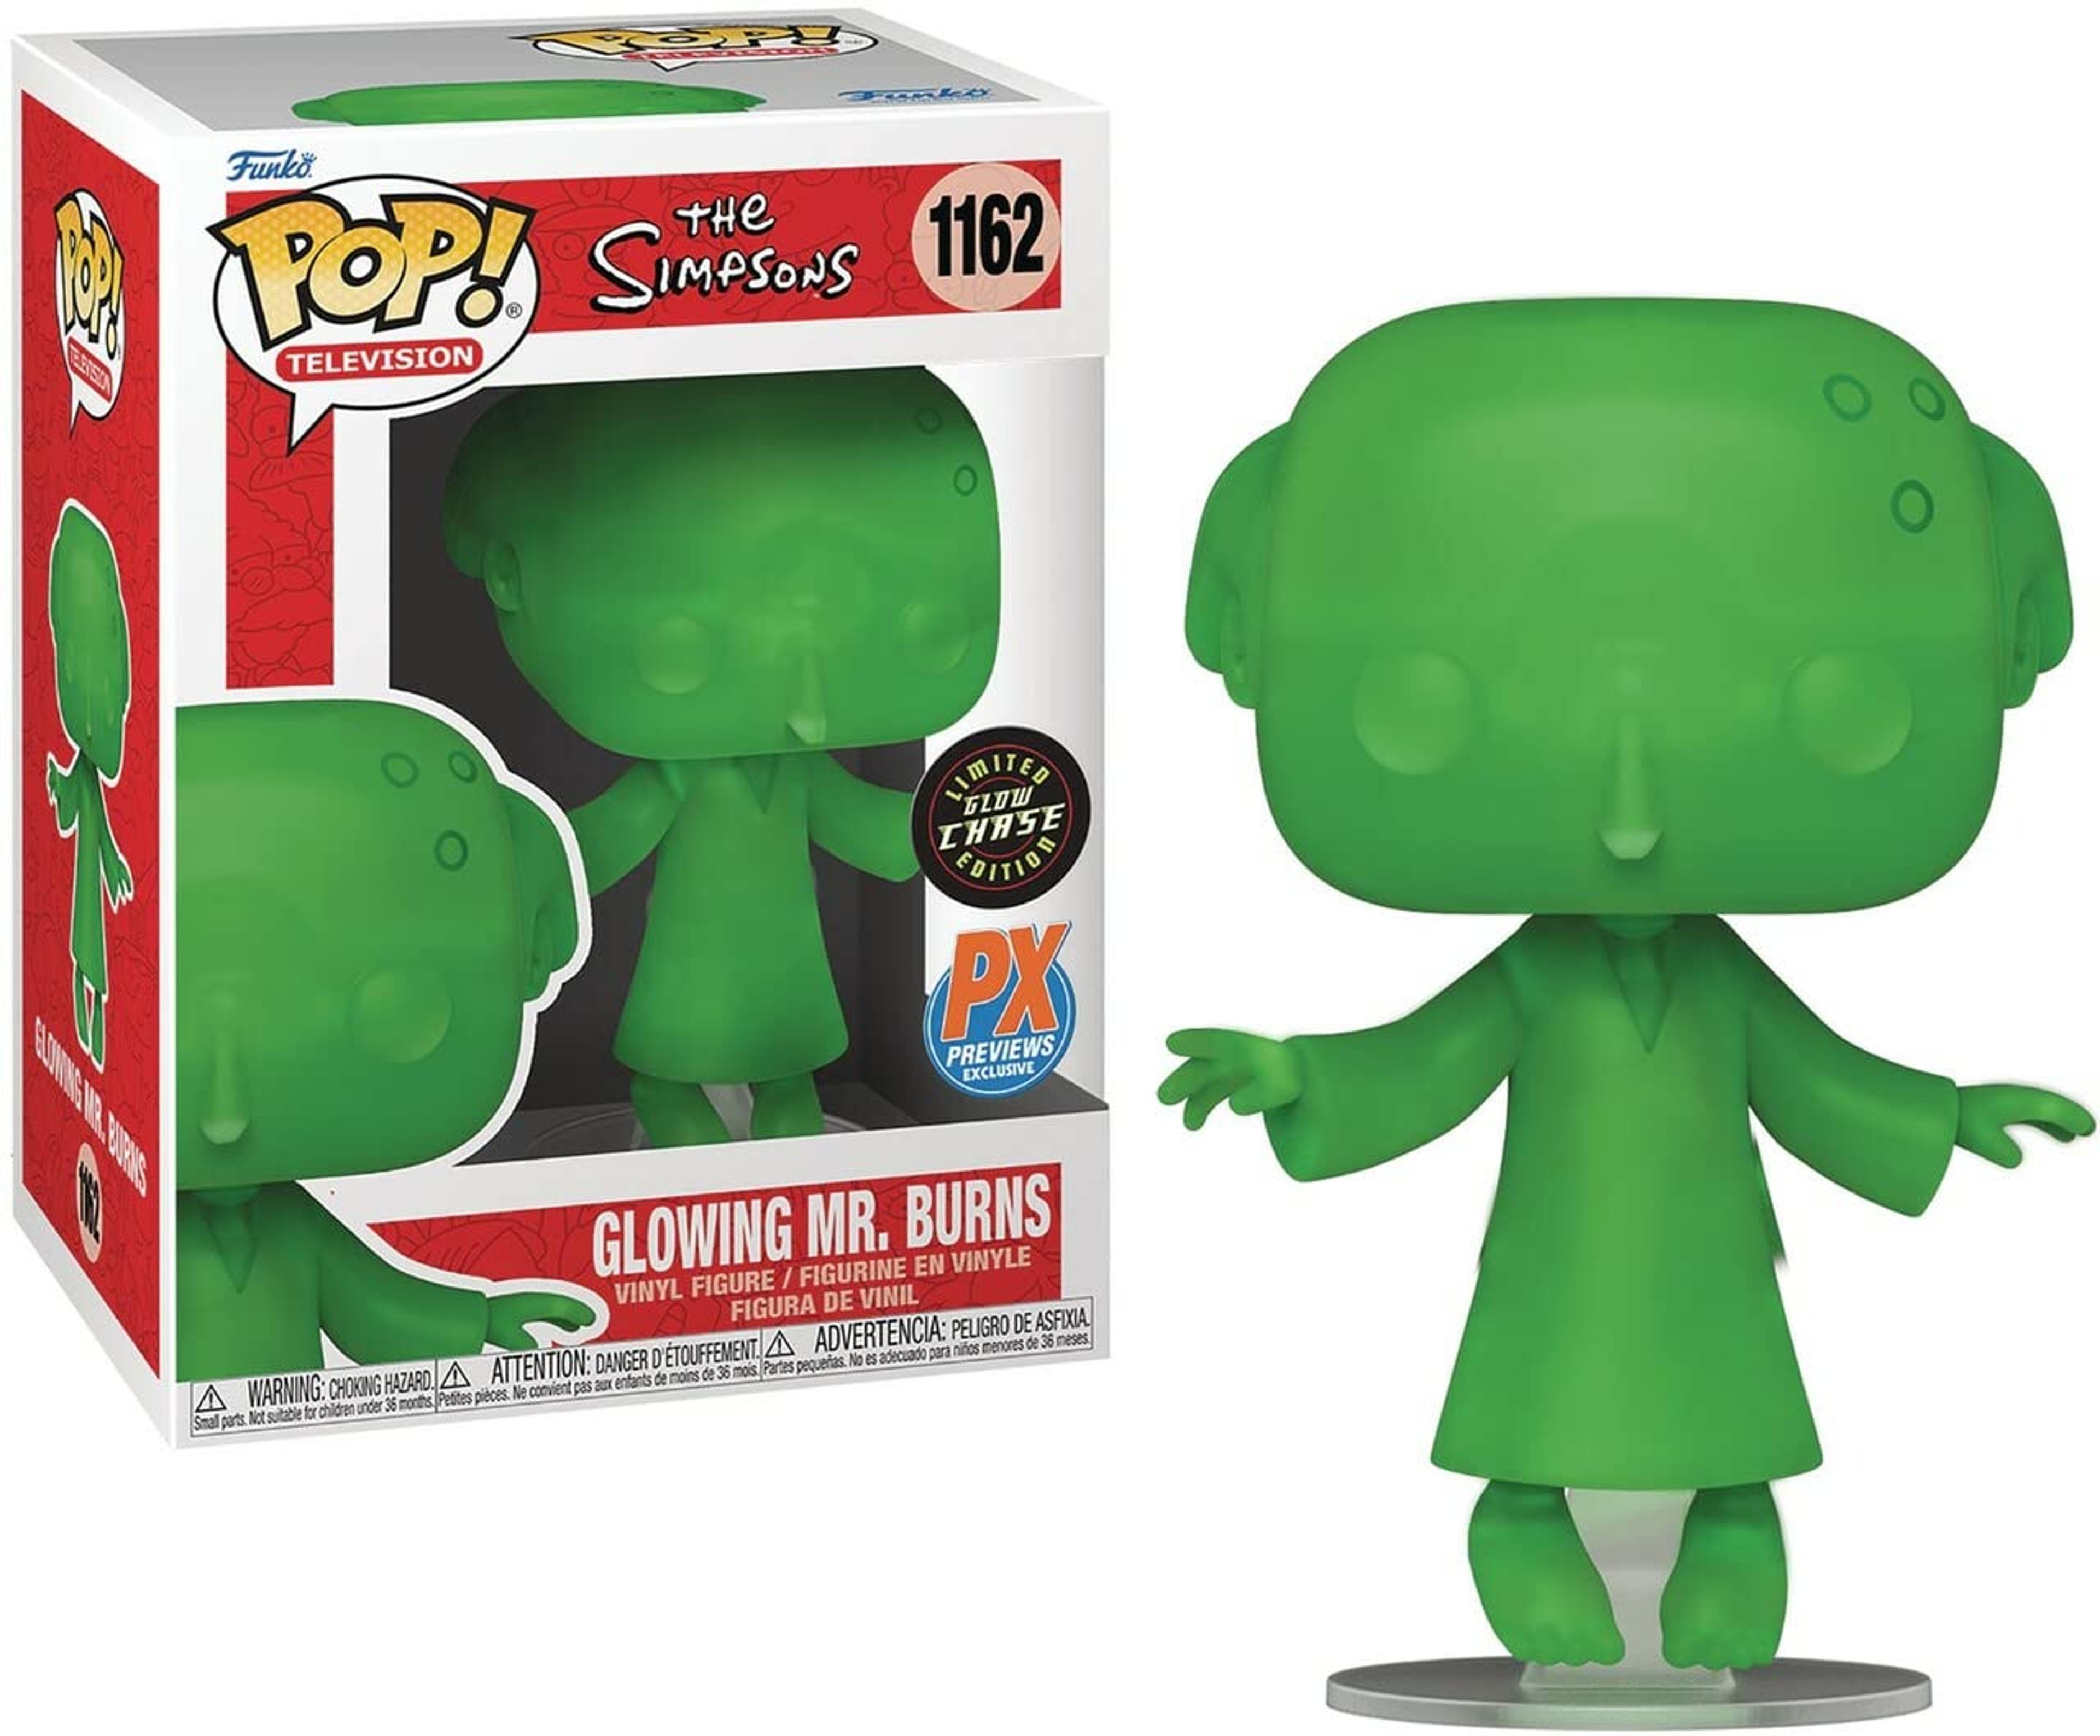 Alternate View 1 of Funko Pop! The Simpsons Mr. Burns Glow In The Dark PX Previews E